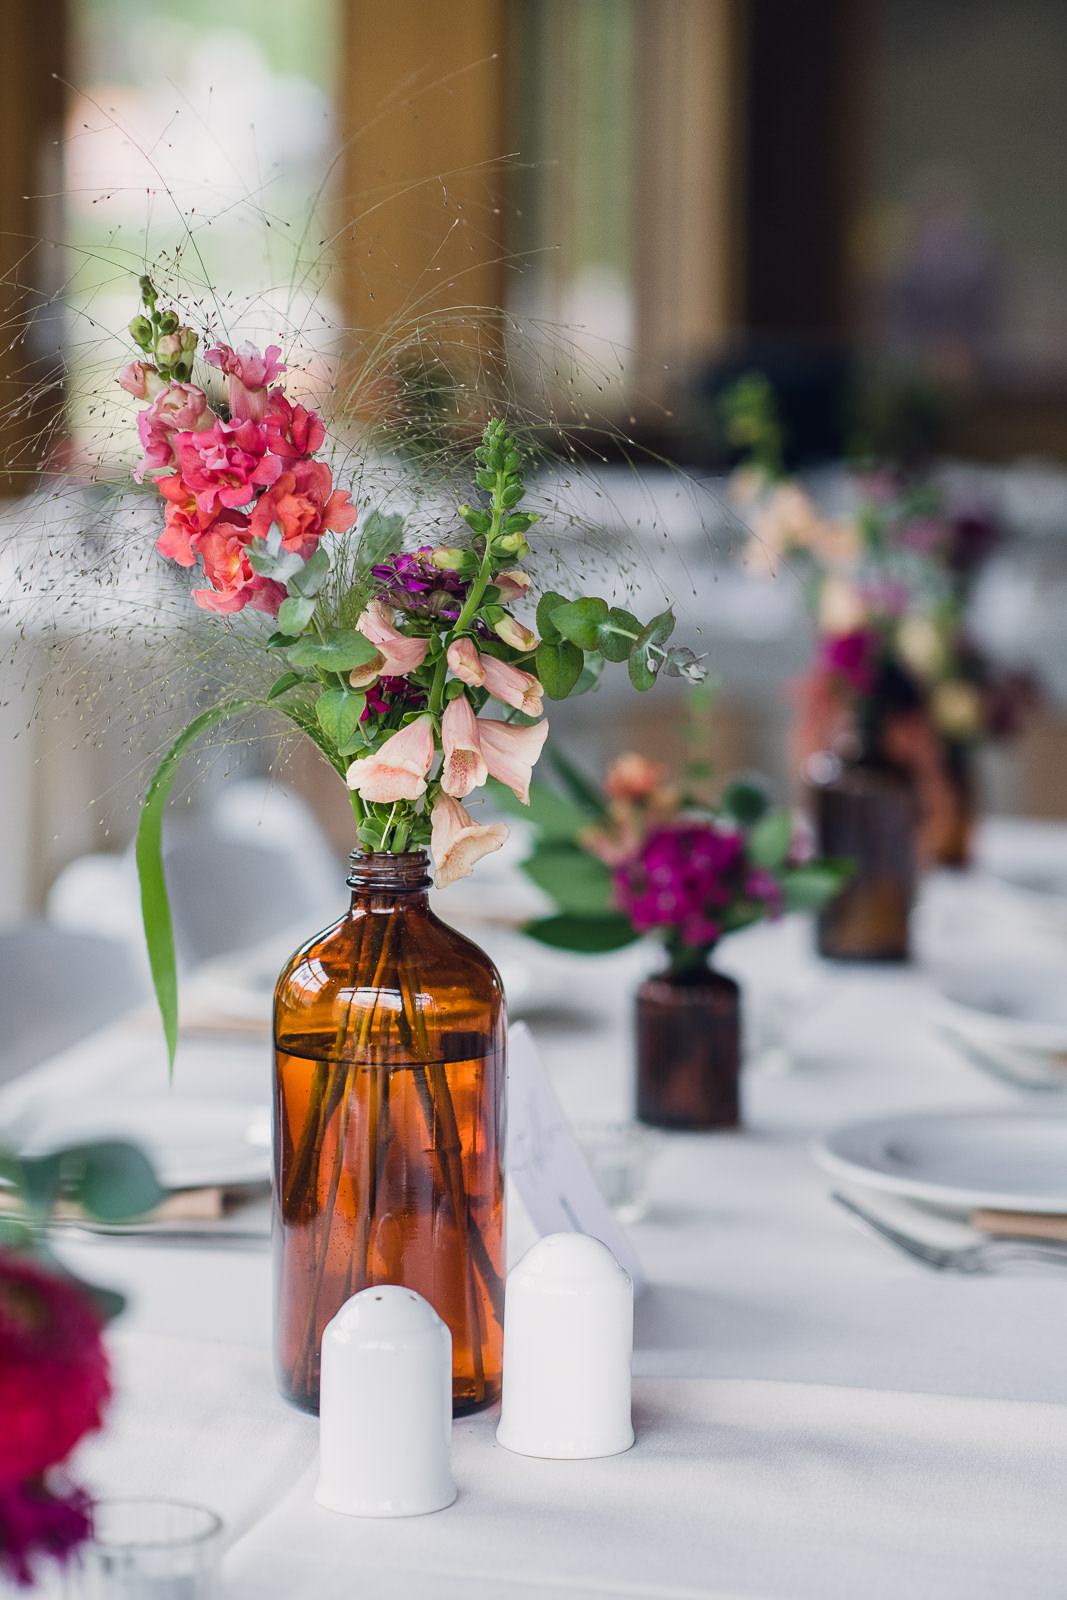 amber glass bud vases filled with shades of pink flowers lining the center of a wedding reception table